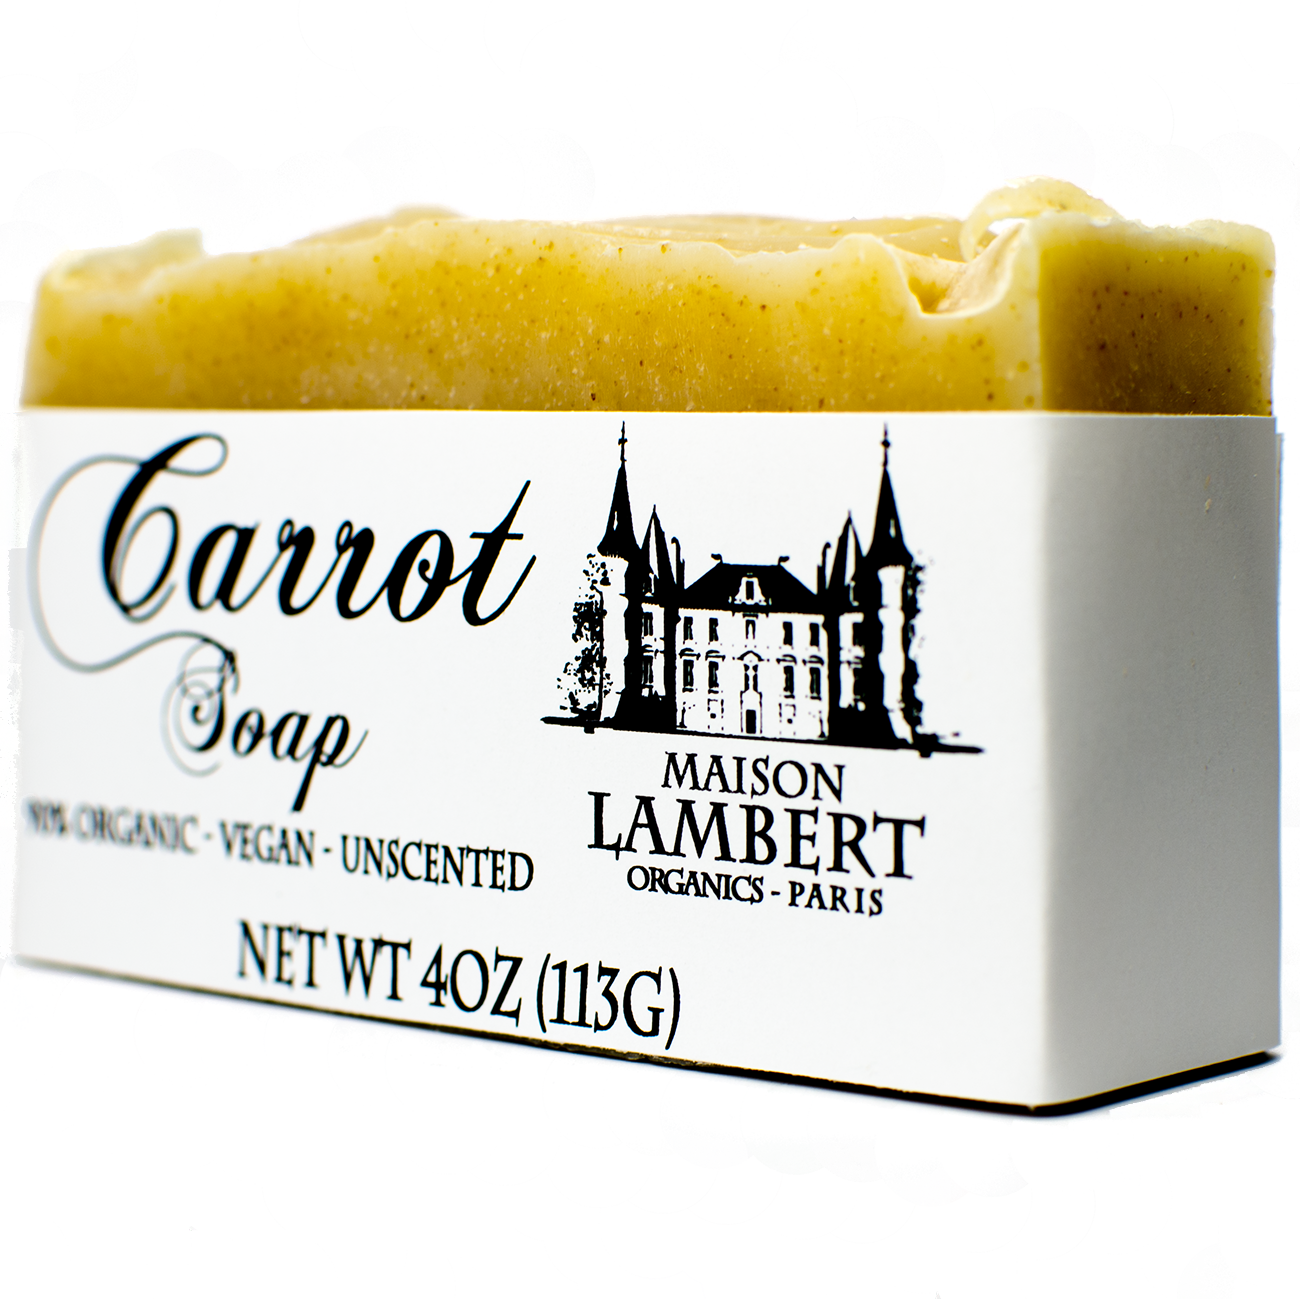 Soap - Organic Carrot Complexion Soap - With Aloe Vera, Argan, Jojoba Oil And Shea Butter - Unscented